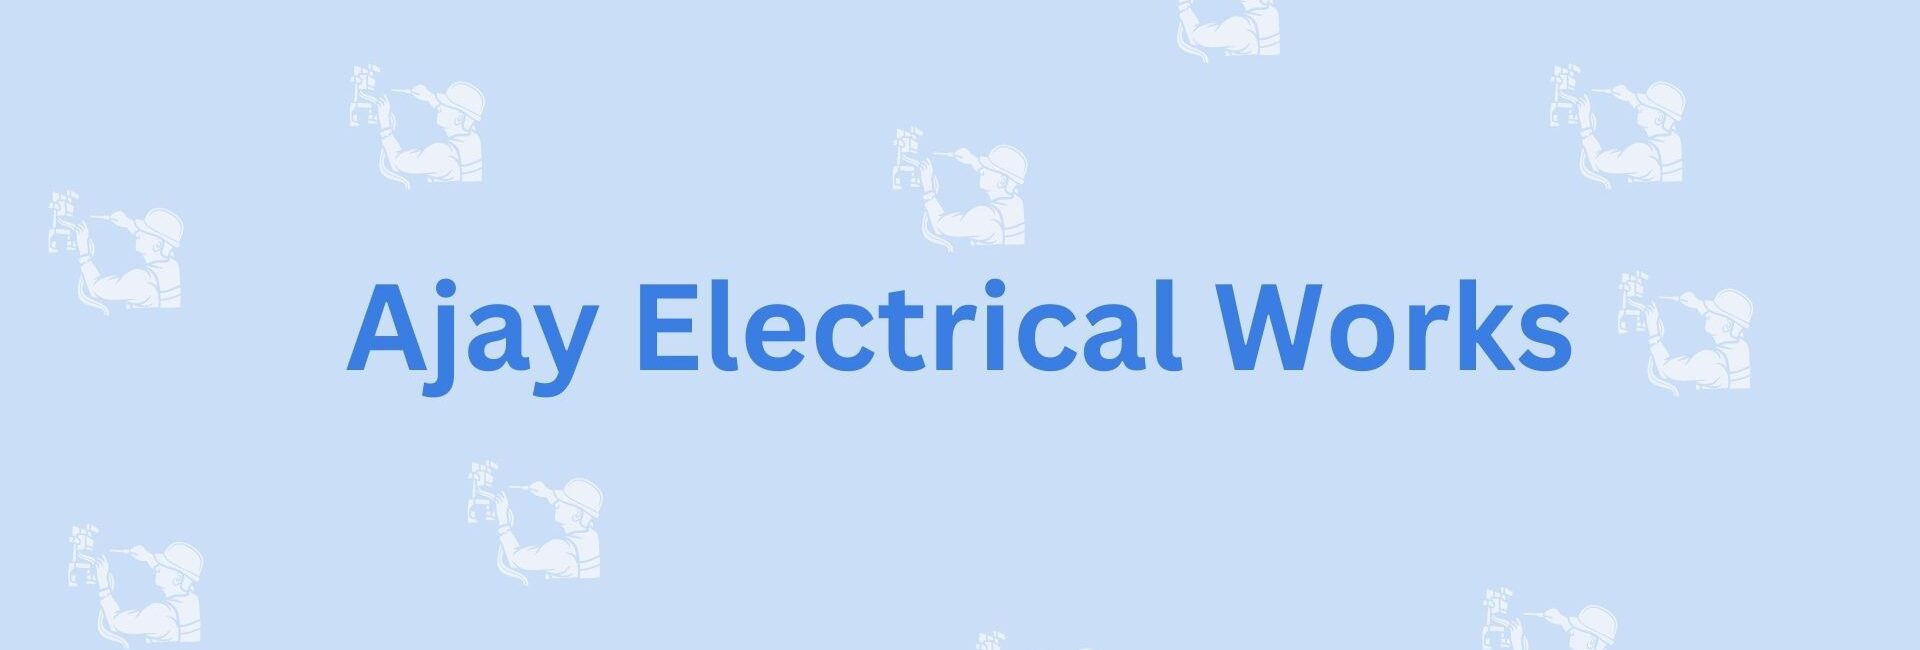 Ajay Electrical Works- Electrician Services in Noida